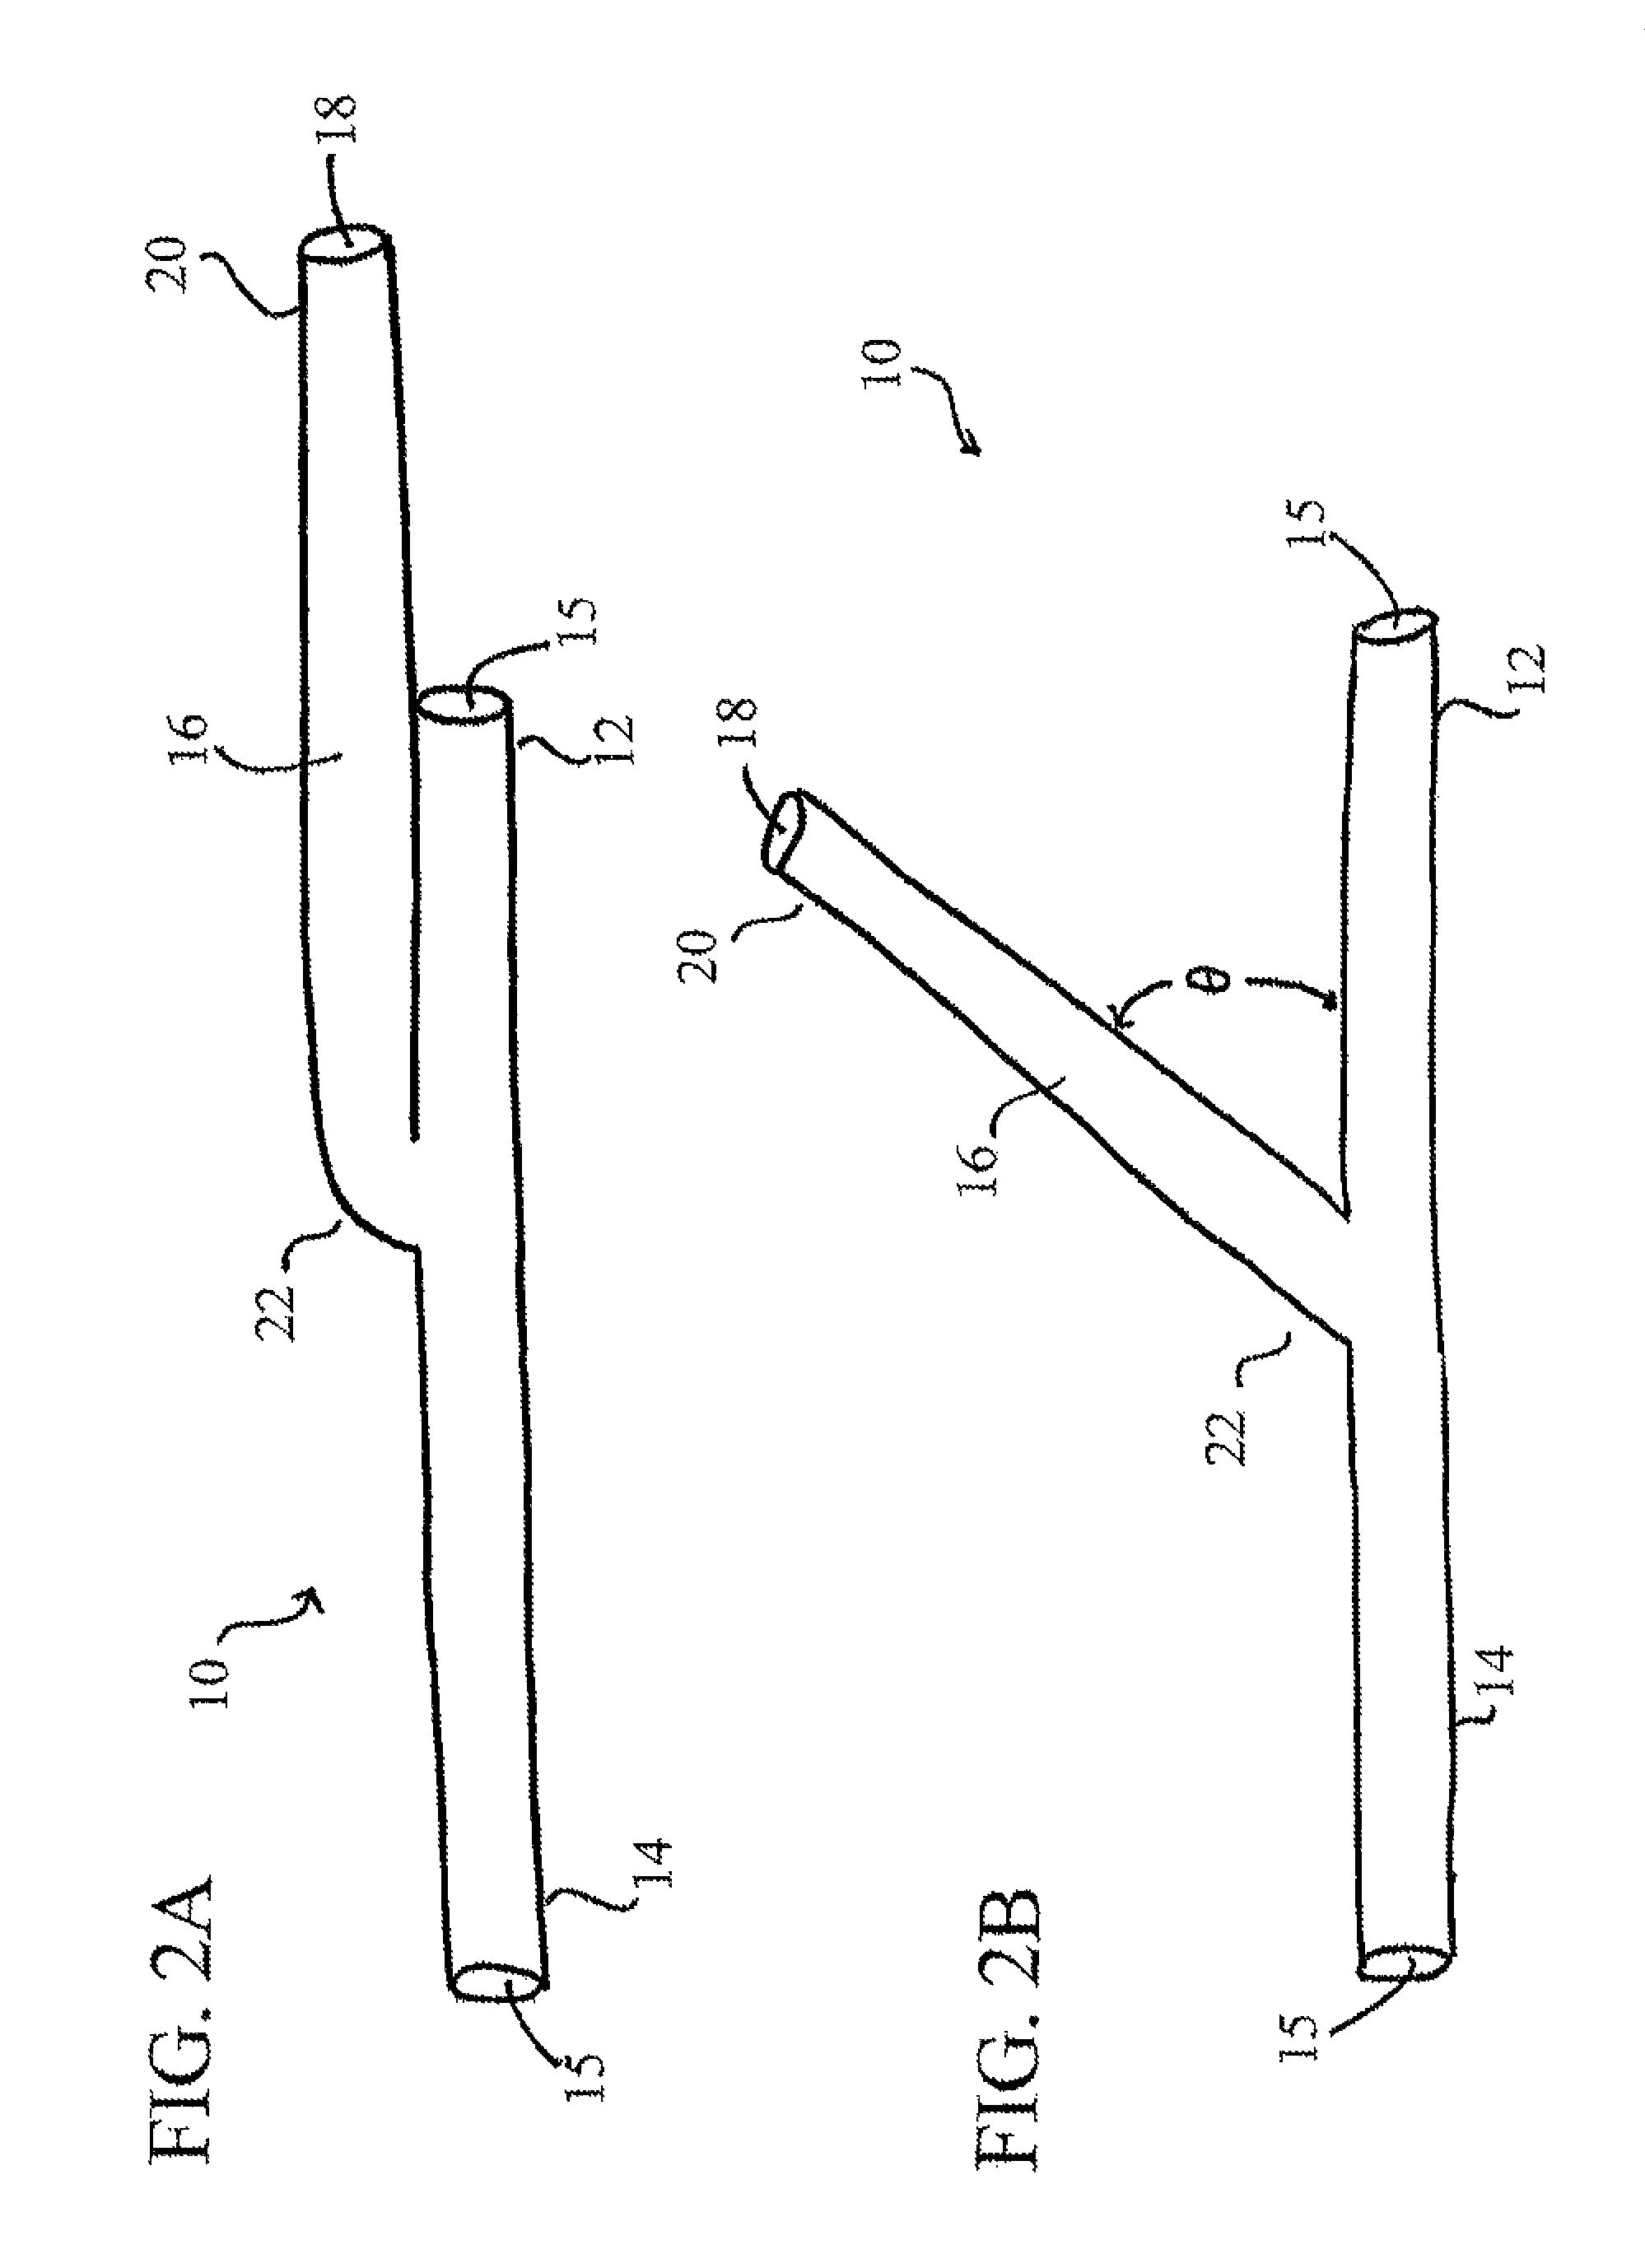 Devices, systems, and methods for organ retroperfusion